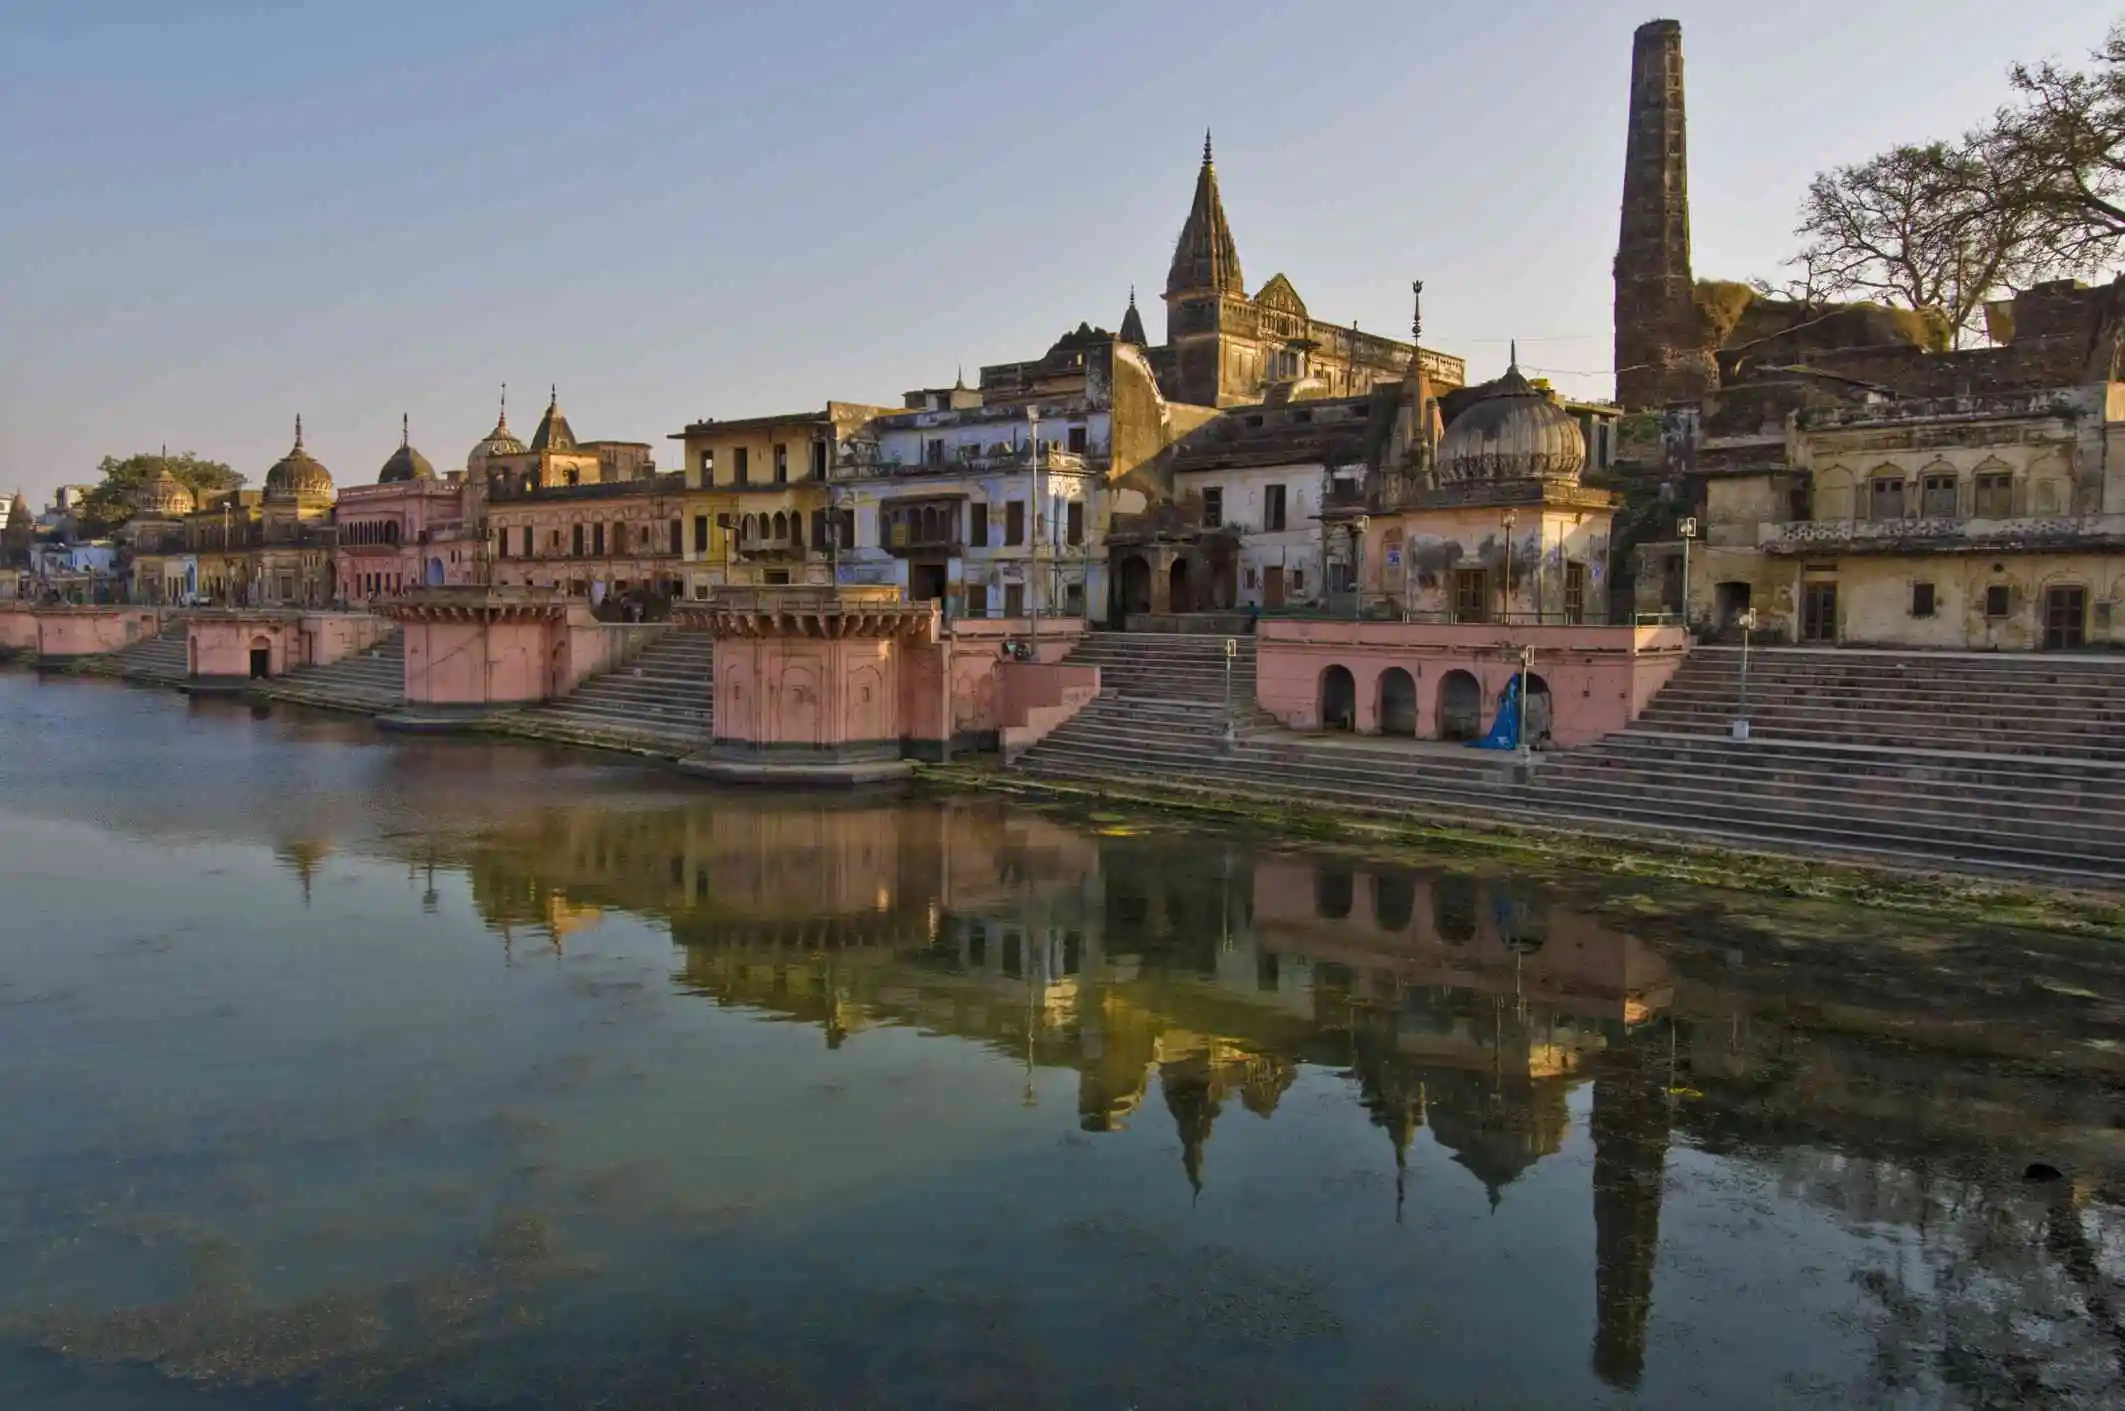 Historic Inns and Heritage Hotels of Ayodhya